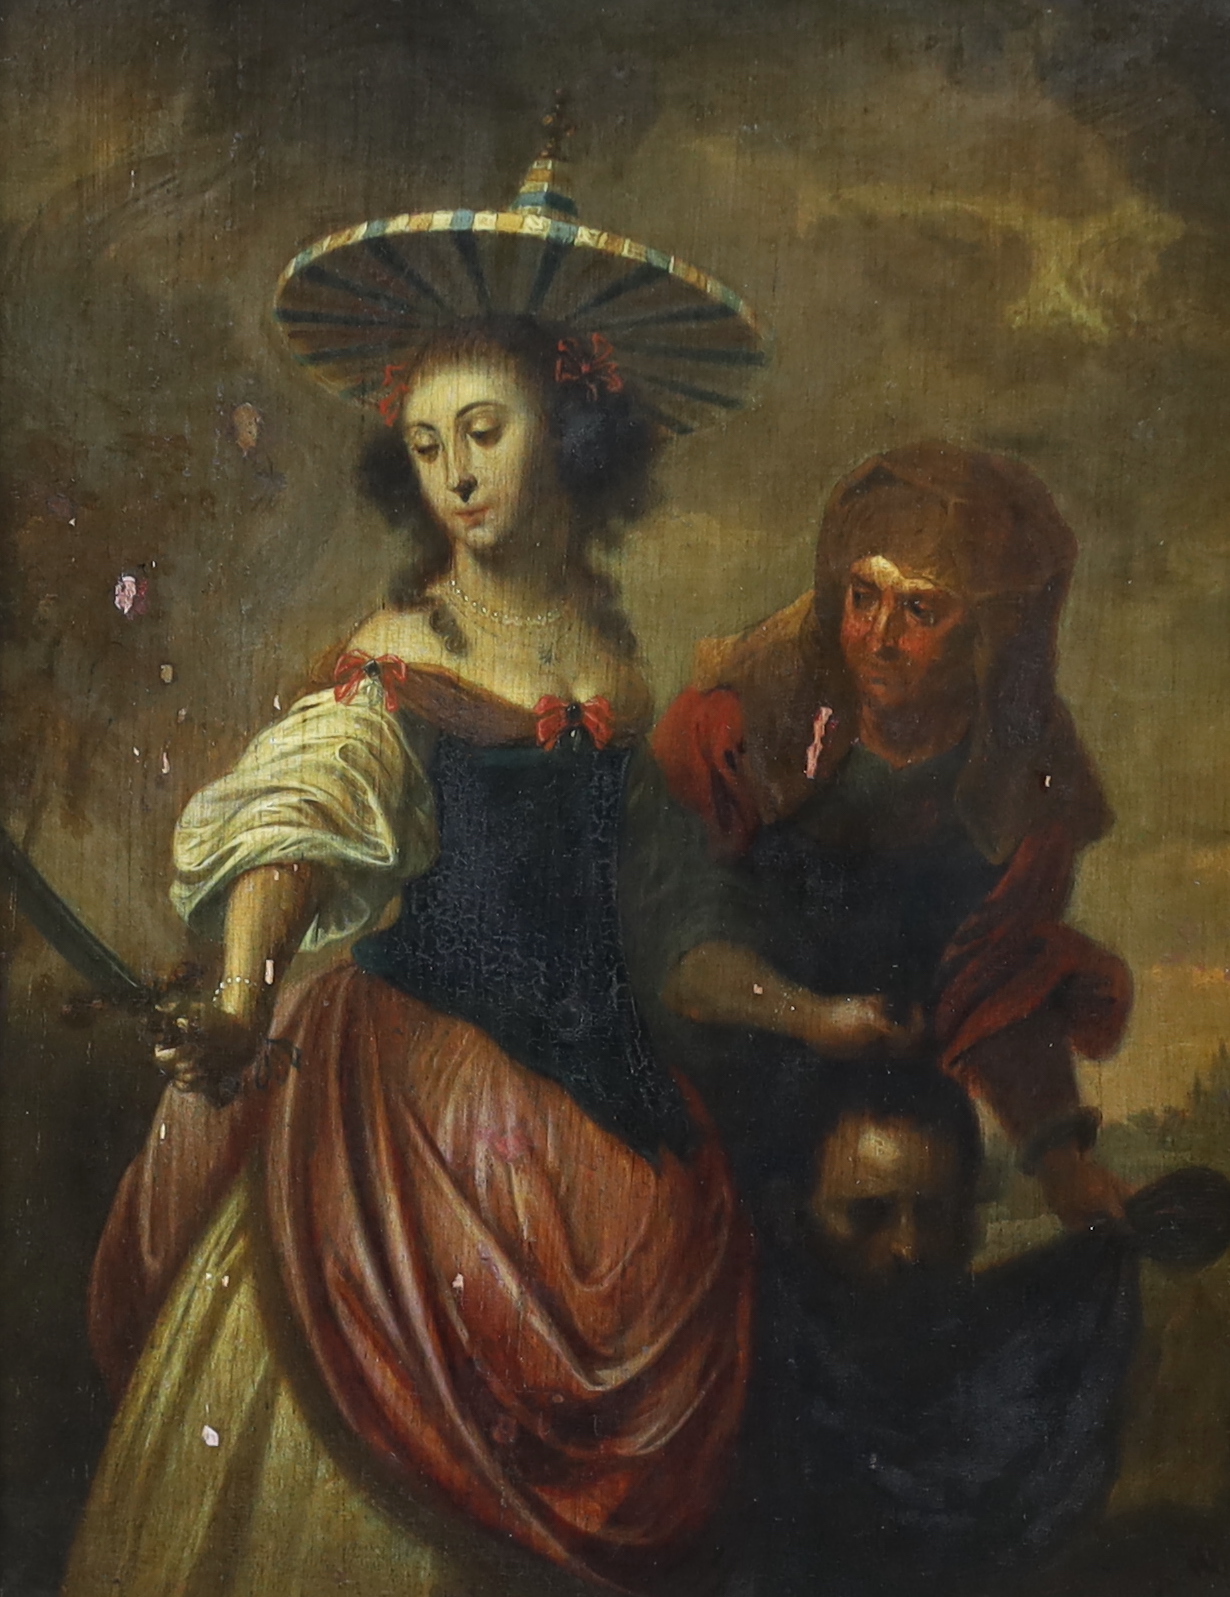 18th century French / Dutch School, Judith with the head of Holofernes, oil on panel, 23.5 x 17.5cm